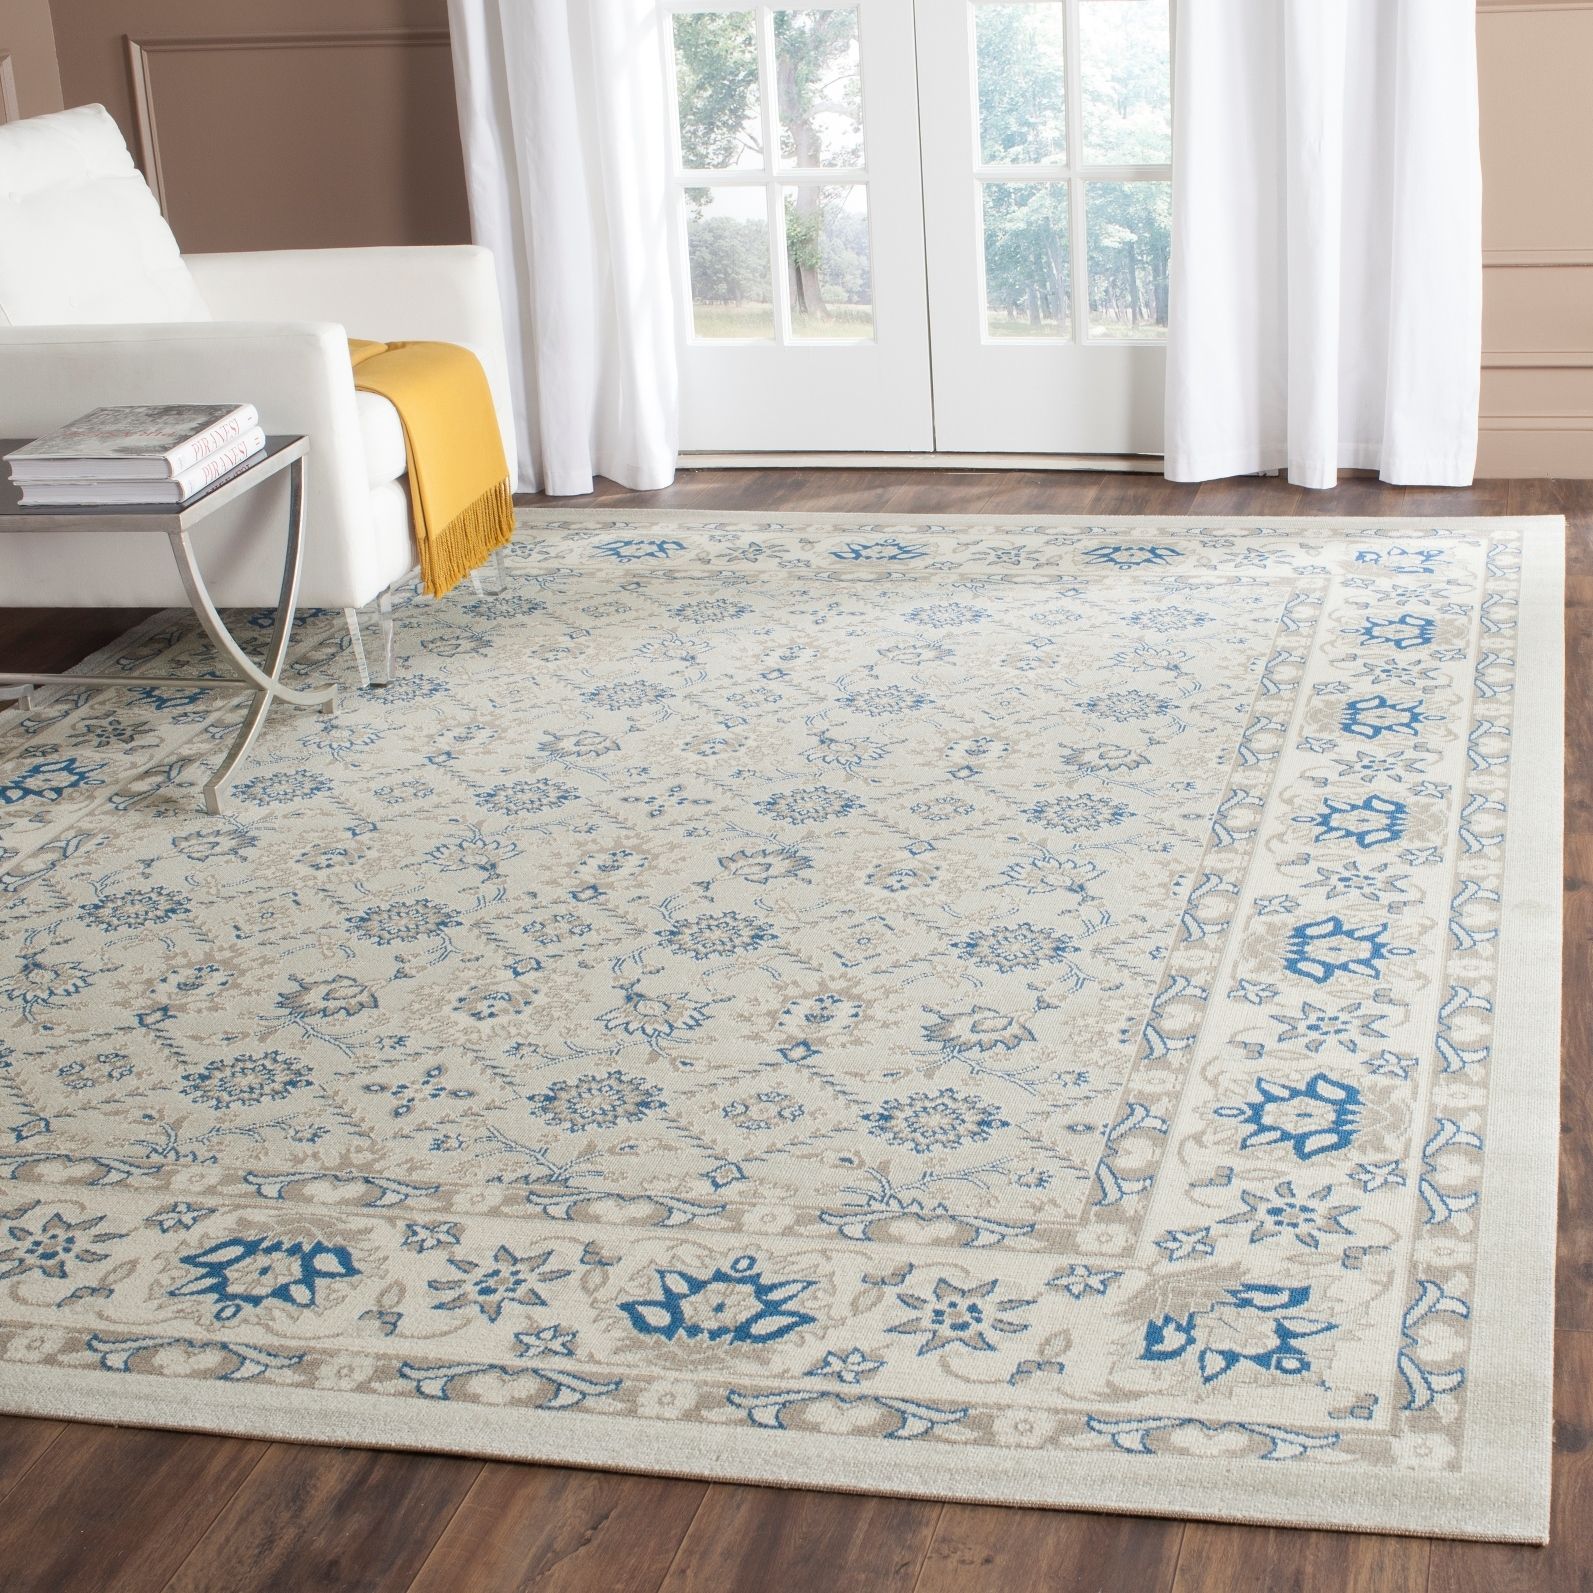 Sensational Design Cotton Area Rug Fresh Decoration Turquoise And For Non Wool Area Rugs (View 2 of 15)